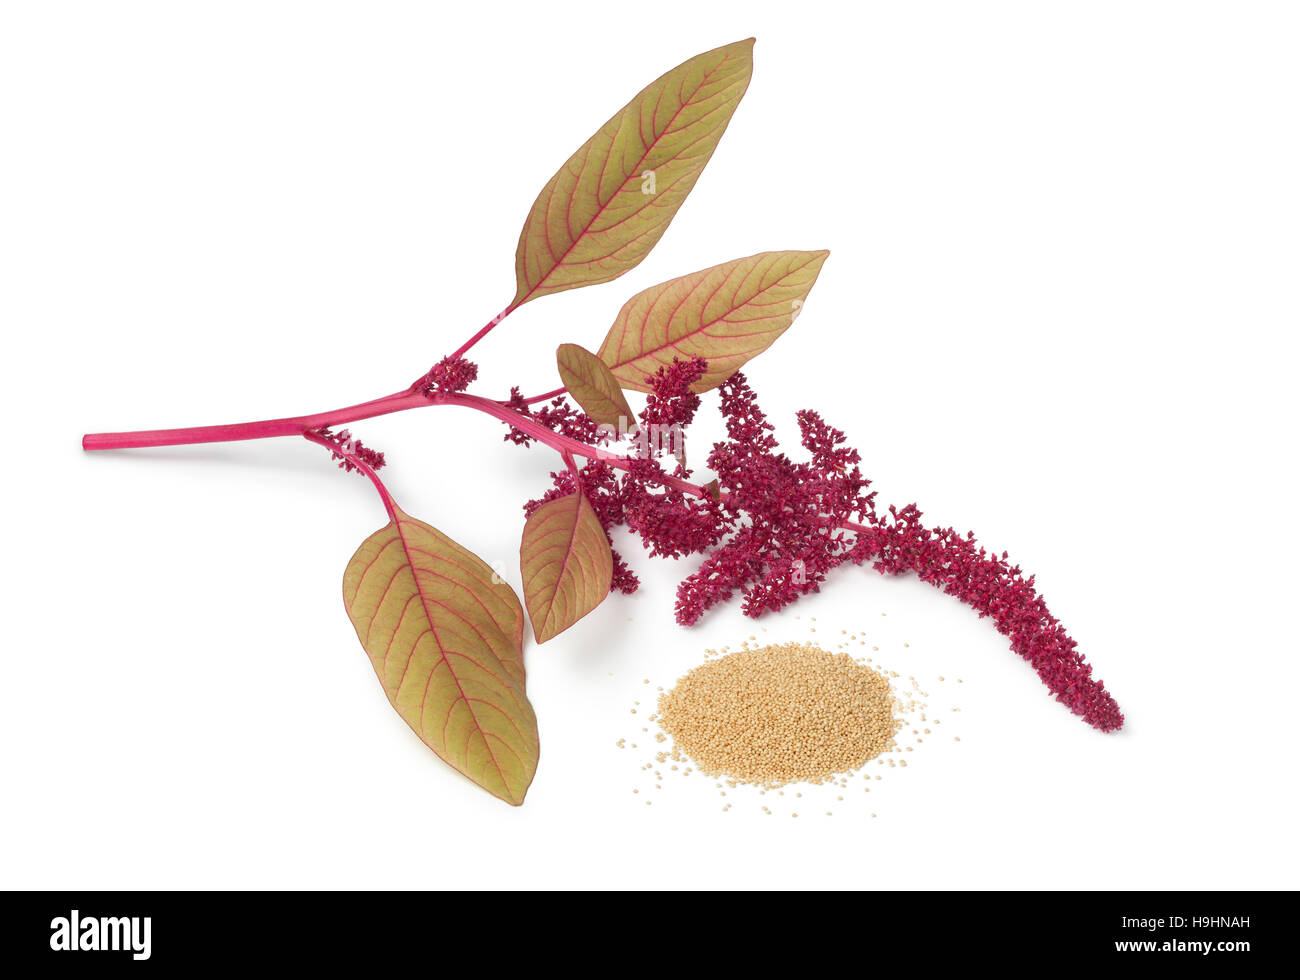 Twig with amaranth flowers and a heap of seeds on white background Stock Photo